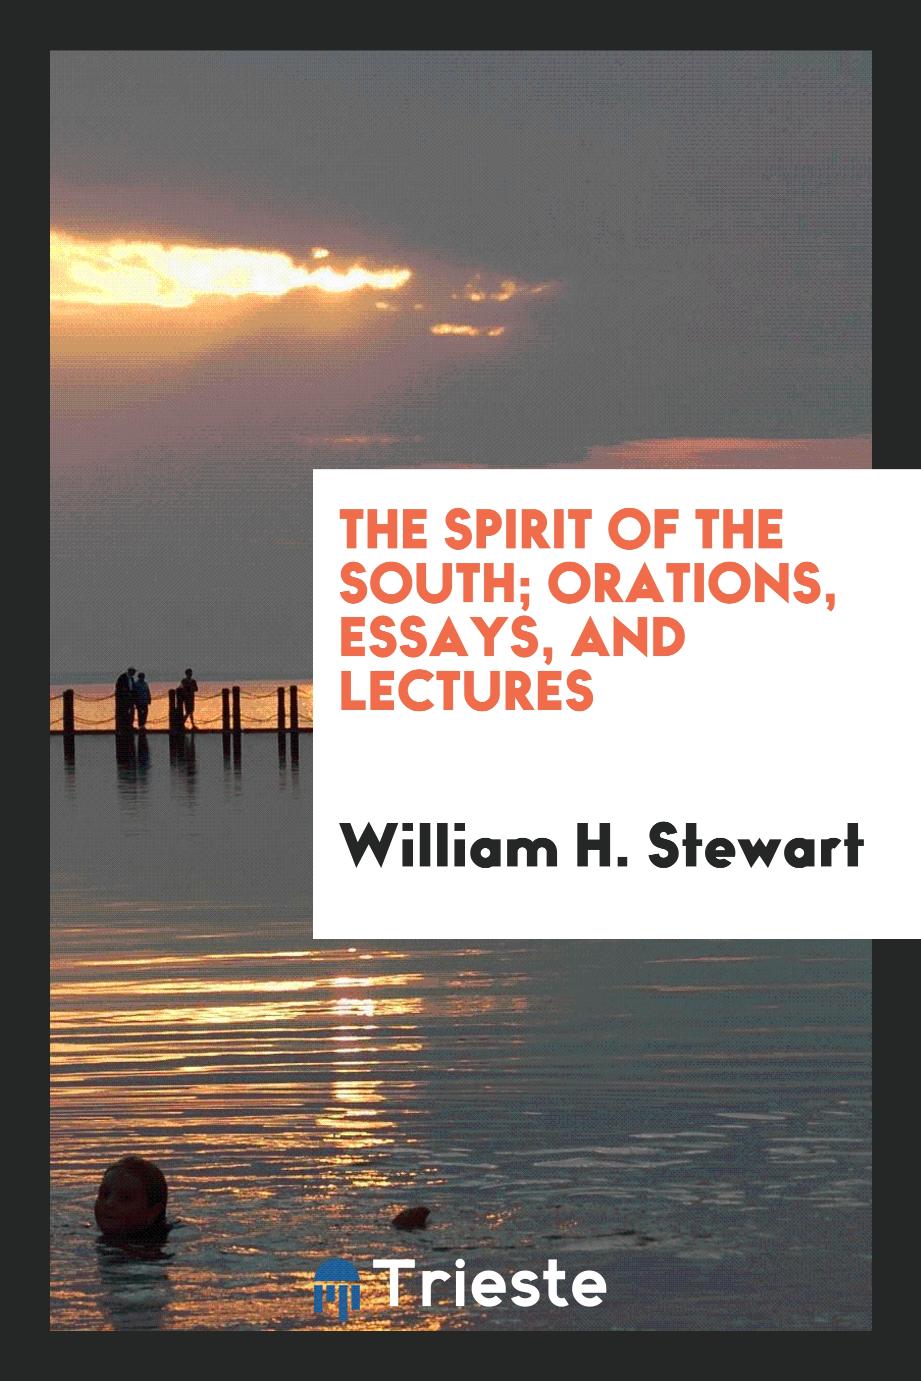 The spirit of the South; orations, essays, and lectures